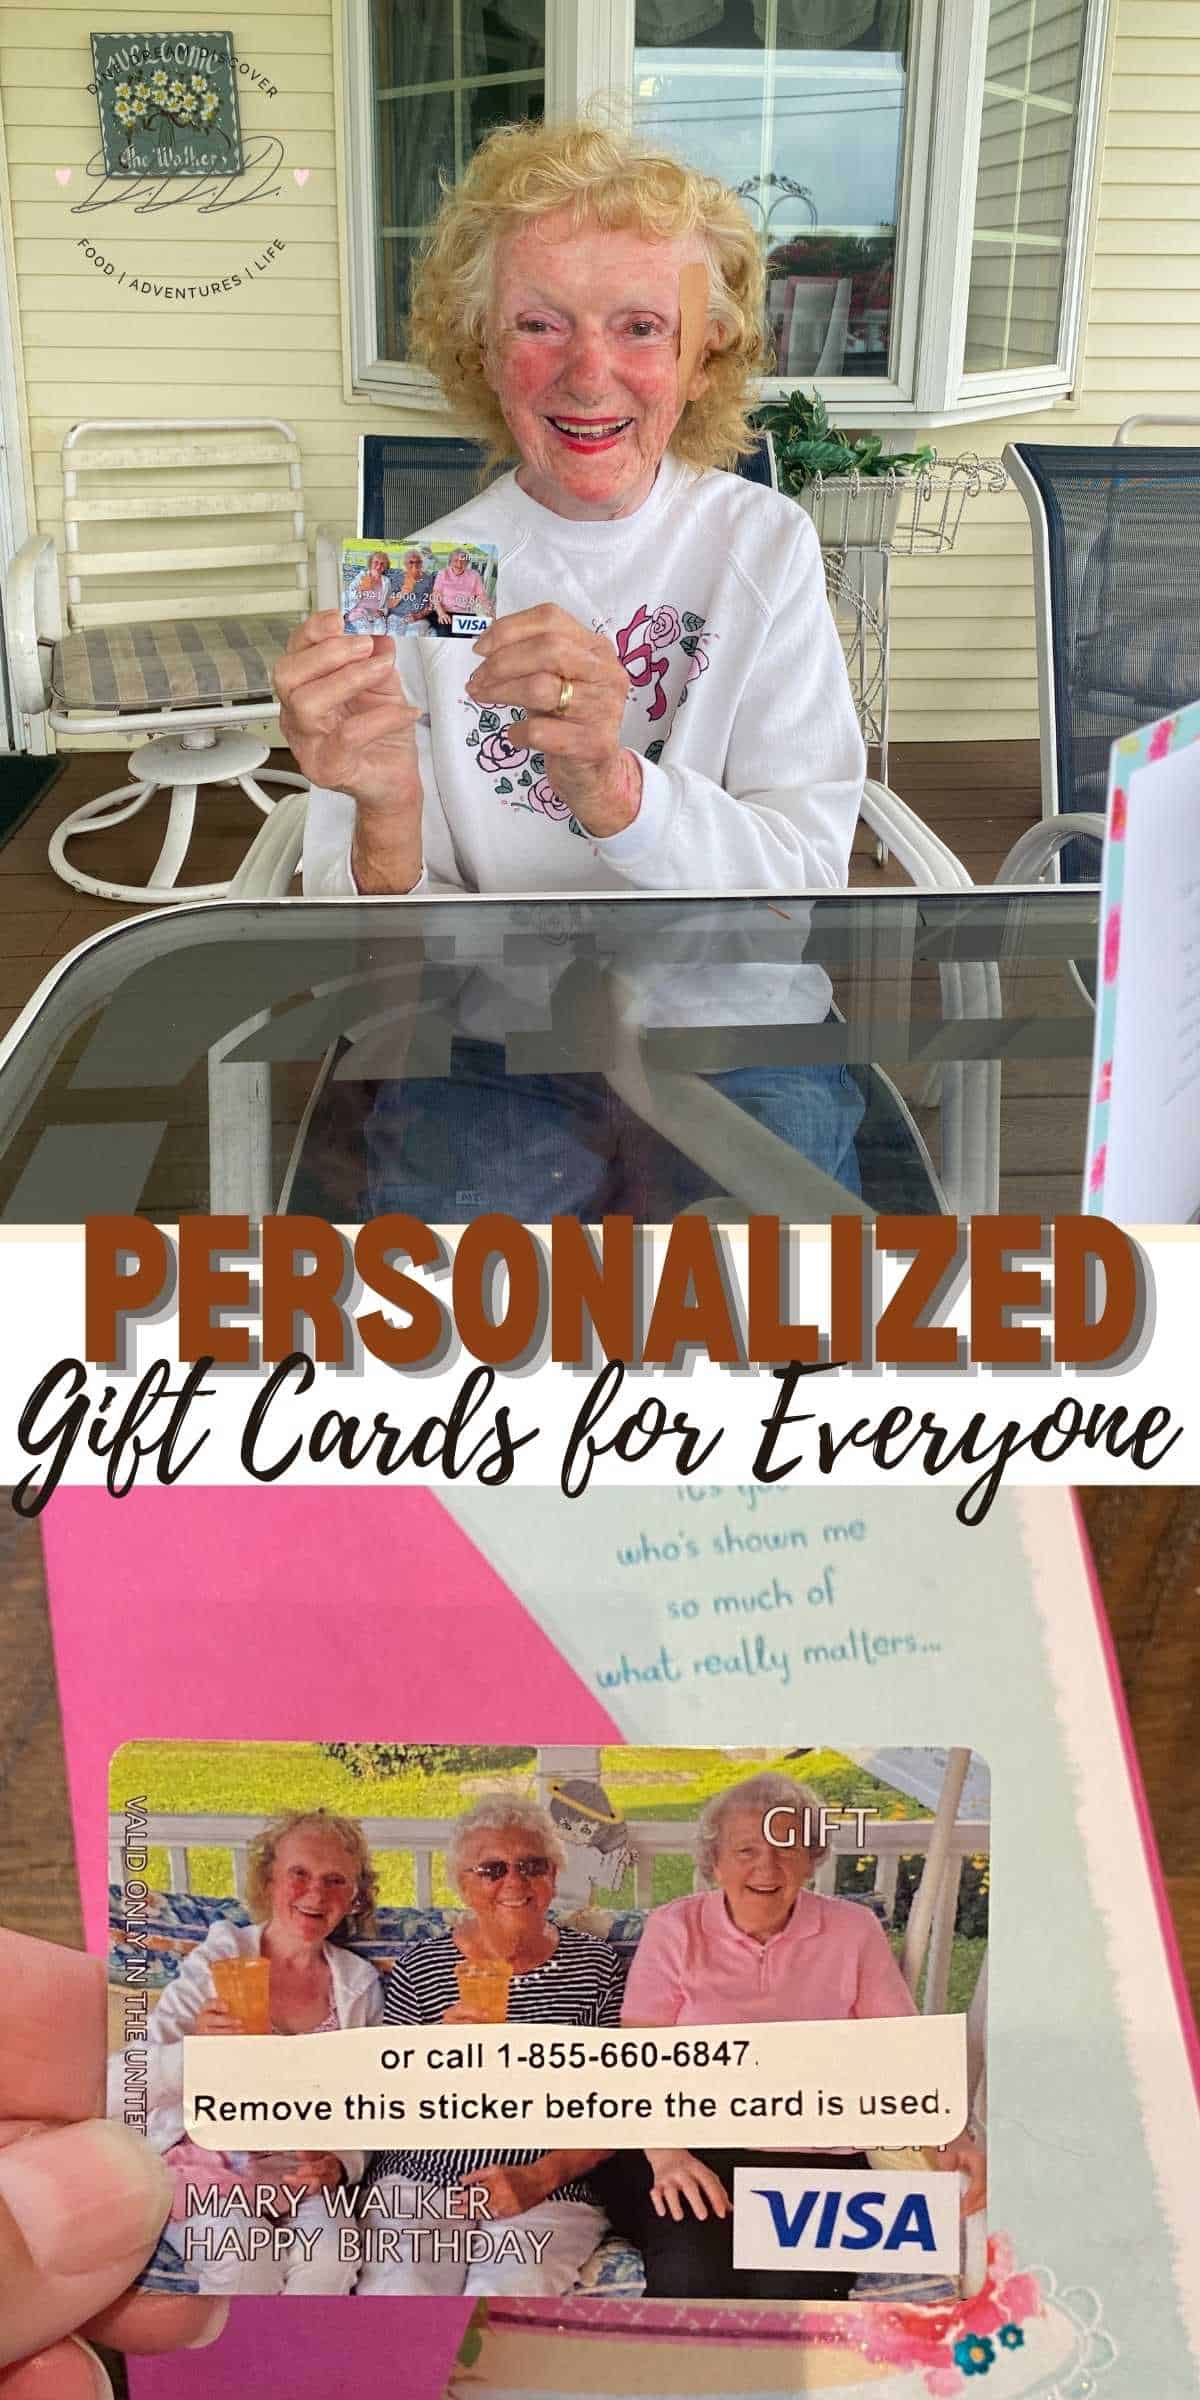 Personalized Gift Cards from Gift Card Granny